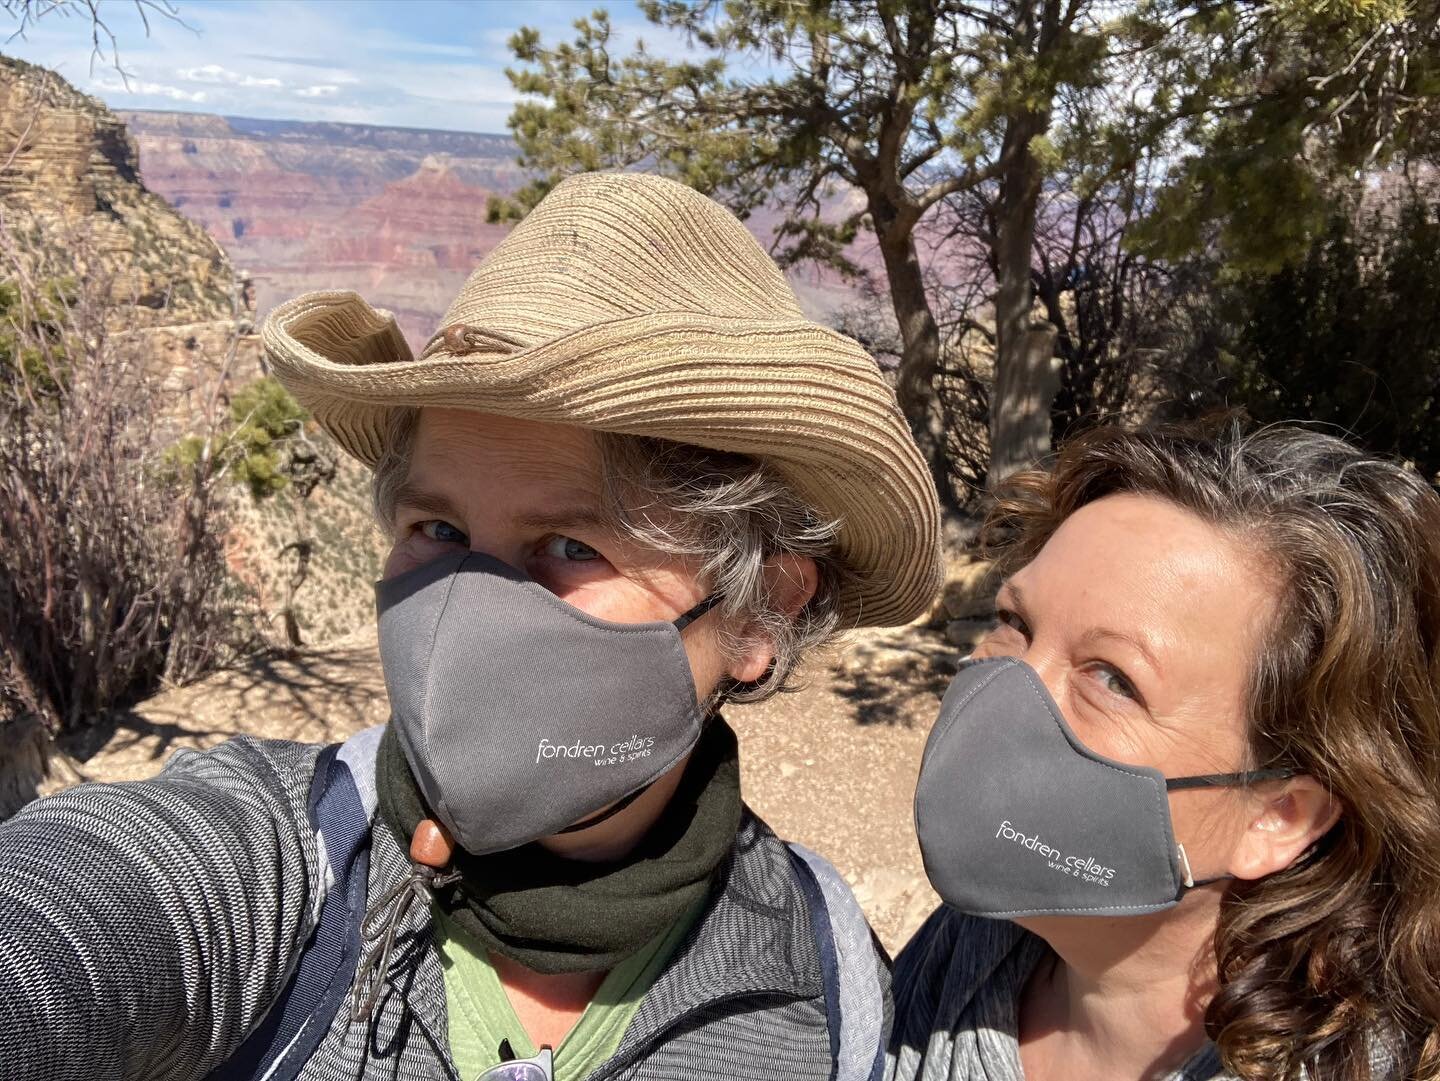 Representing @fondrencellars at the ridiculously astounding Grand Canyon. Hadn&rsquo;t been here since 1990. Didn&rsquo;t disappoint. #wow #absolutelyincredible #grandcanyon #paintwhereyouare #watercolor #southernartist #ontheroad